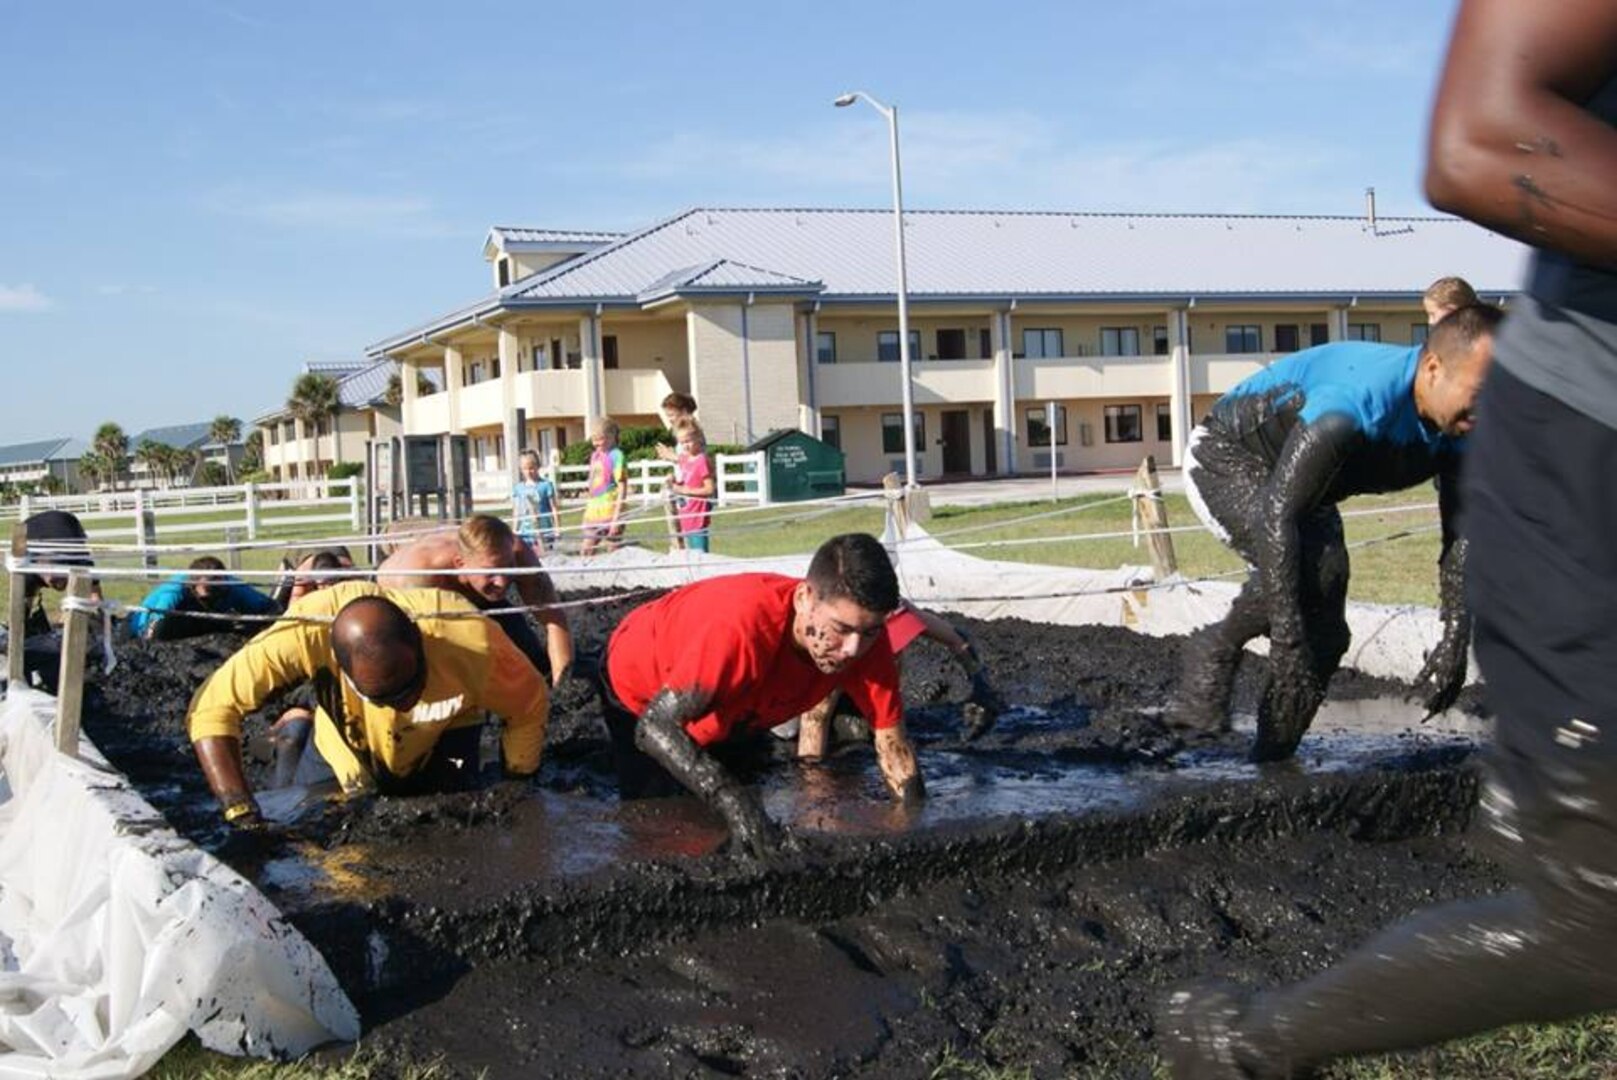 Runners race through obstacles during the Morale, Welfare and Recreation (MWR) Mayport Mud Run 2016. The event is an annual fitness challenge hosted by MWR for service members and their families to promote health and well-being.